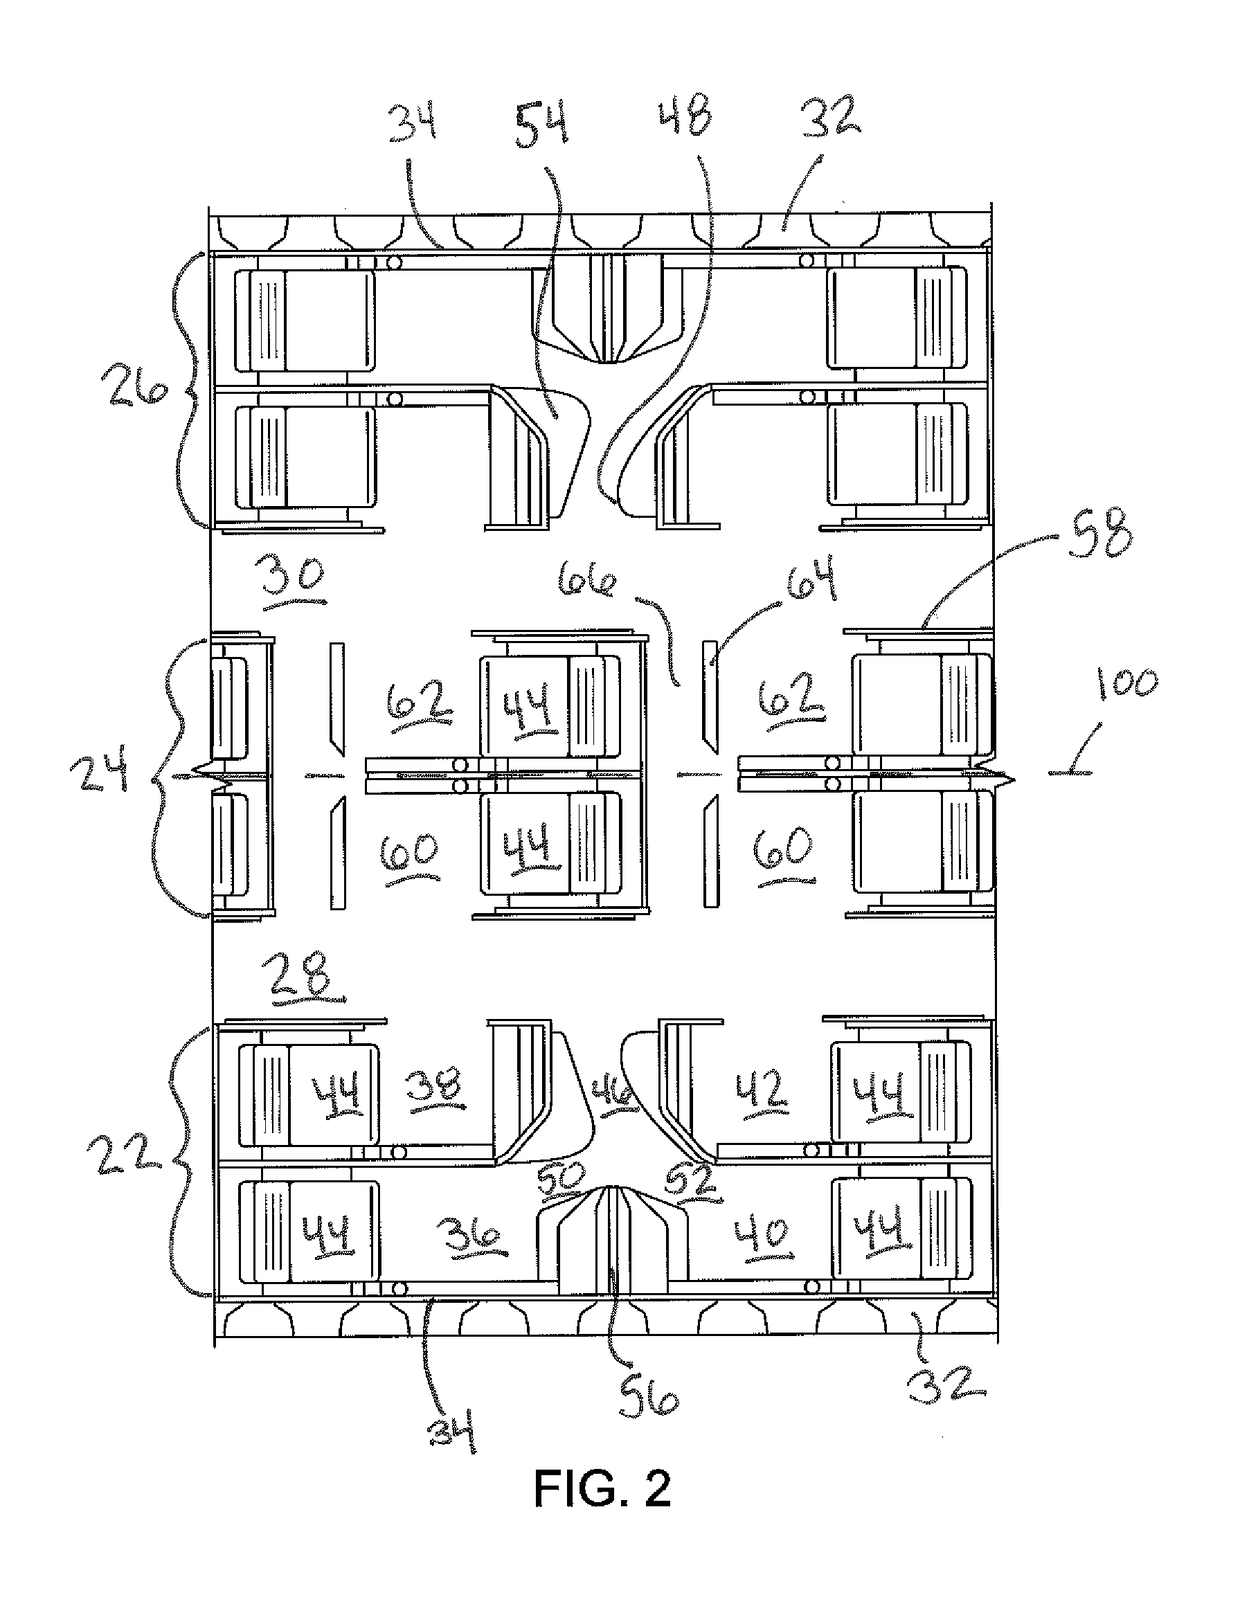 Airliner passenger suite seating arrangements with shared aisle suite access